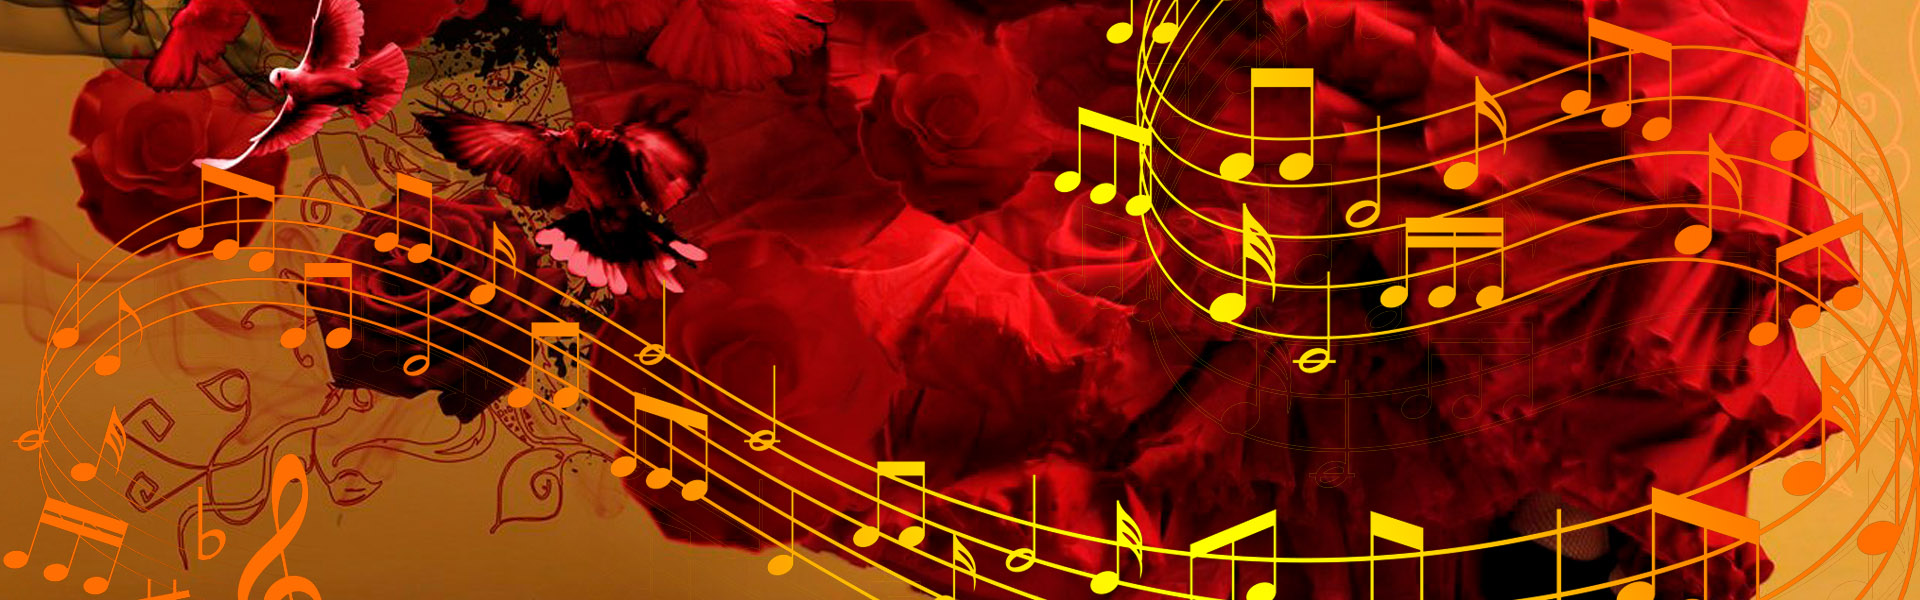 MUSIC OF LOVE AND PASSION